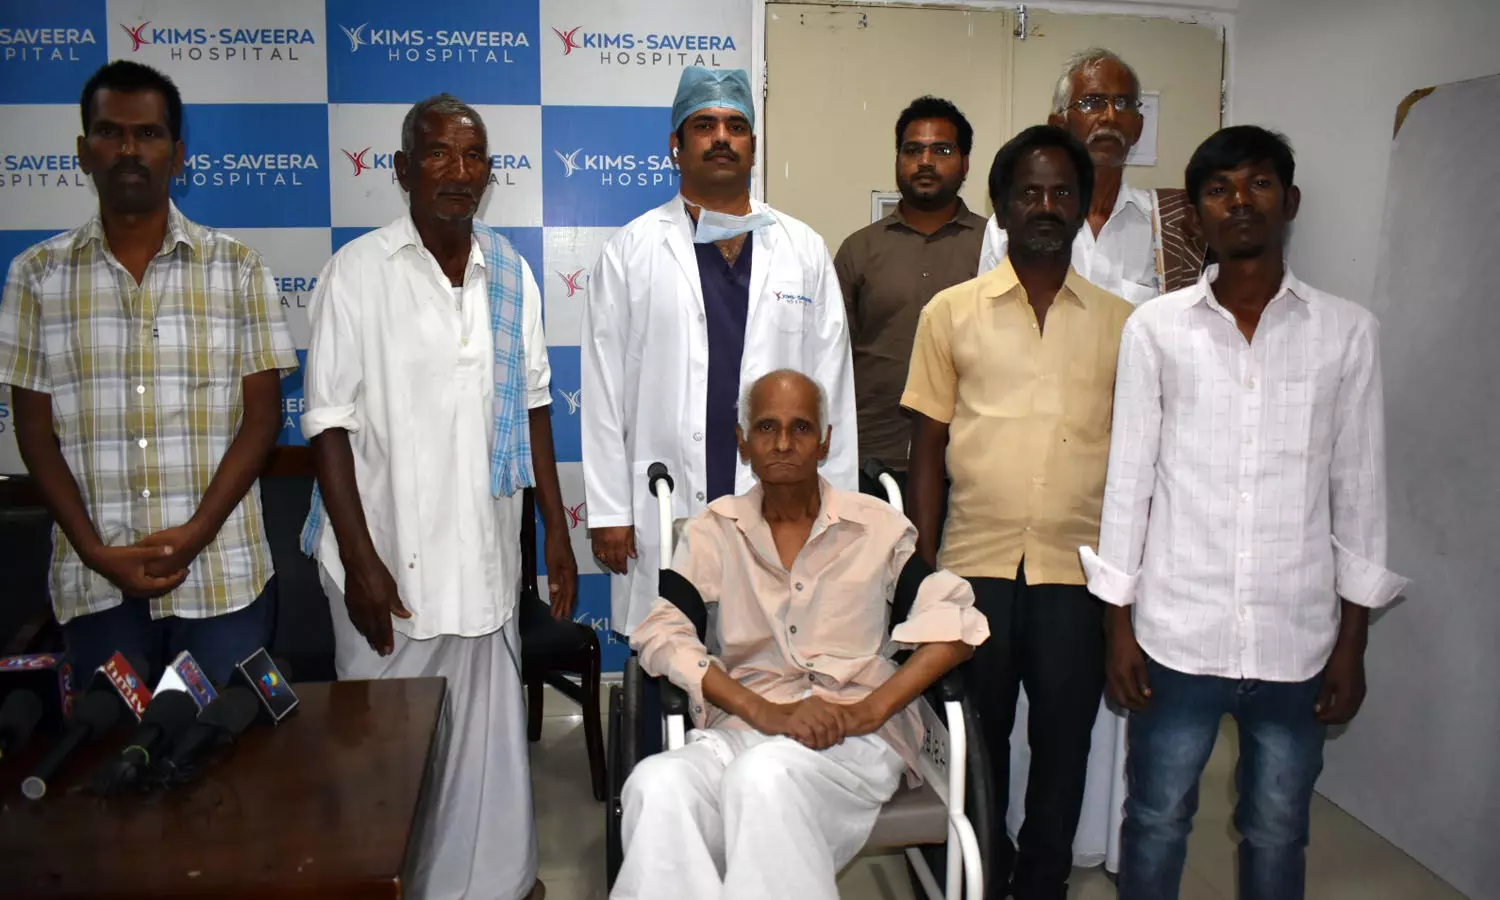 25 Keyhole heart surgeries at KIMS Saveera Hospital in two months; free treatment to Arogya Sri patients